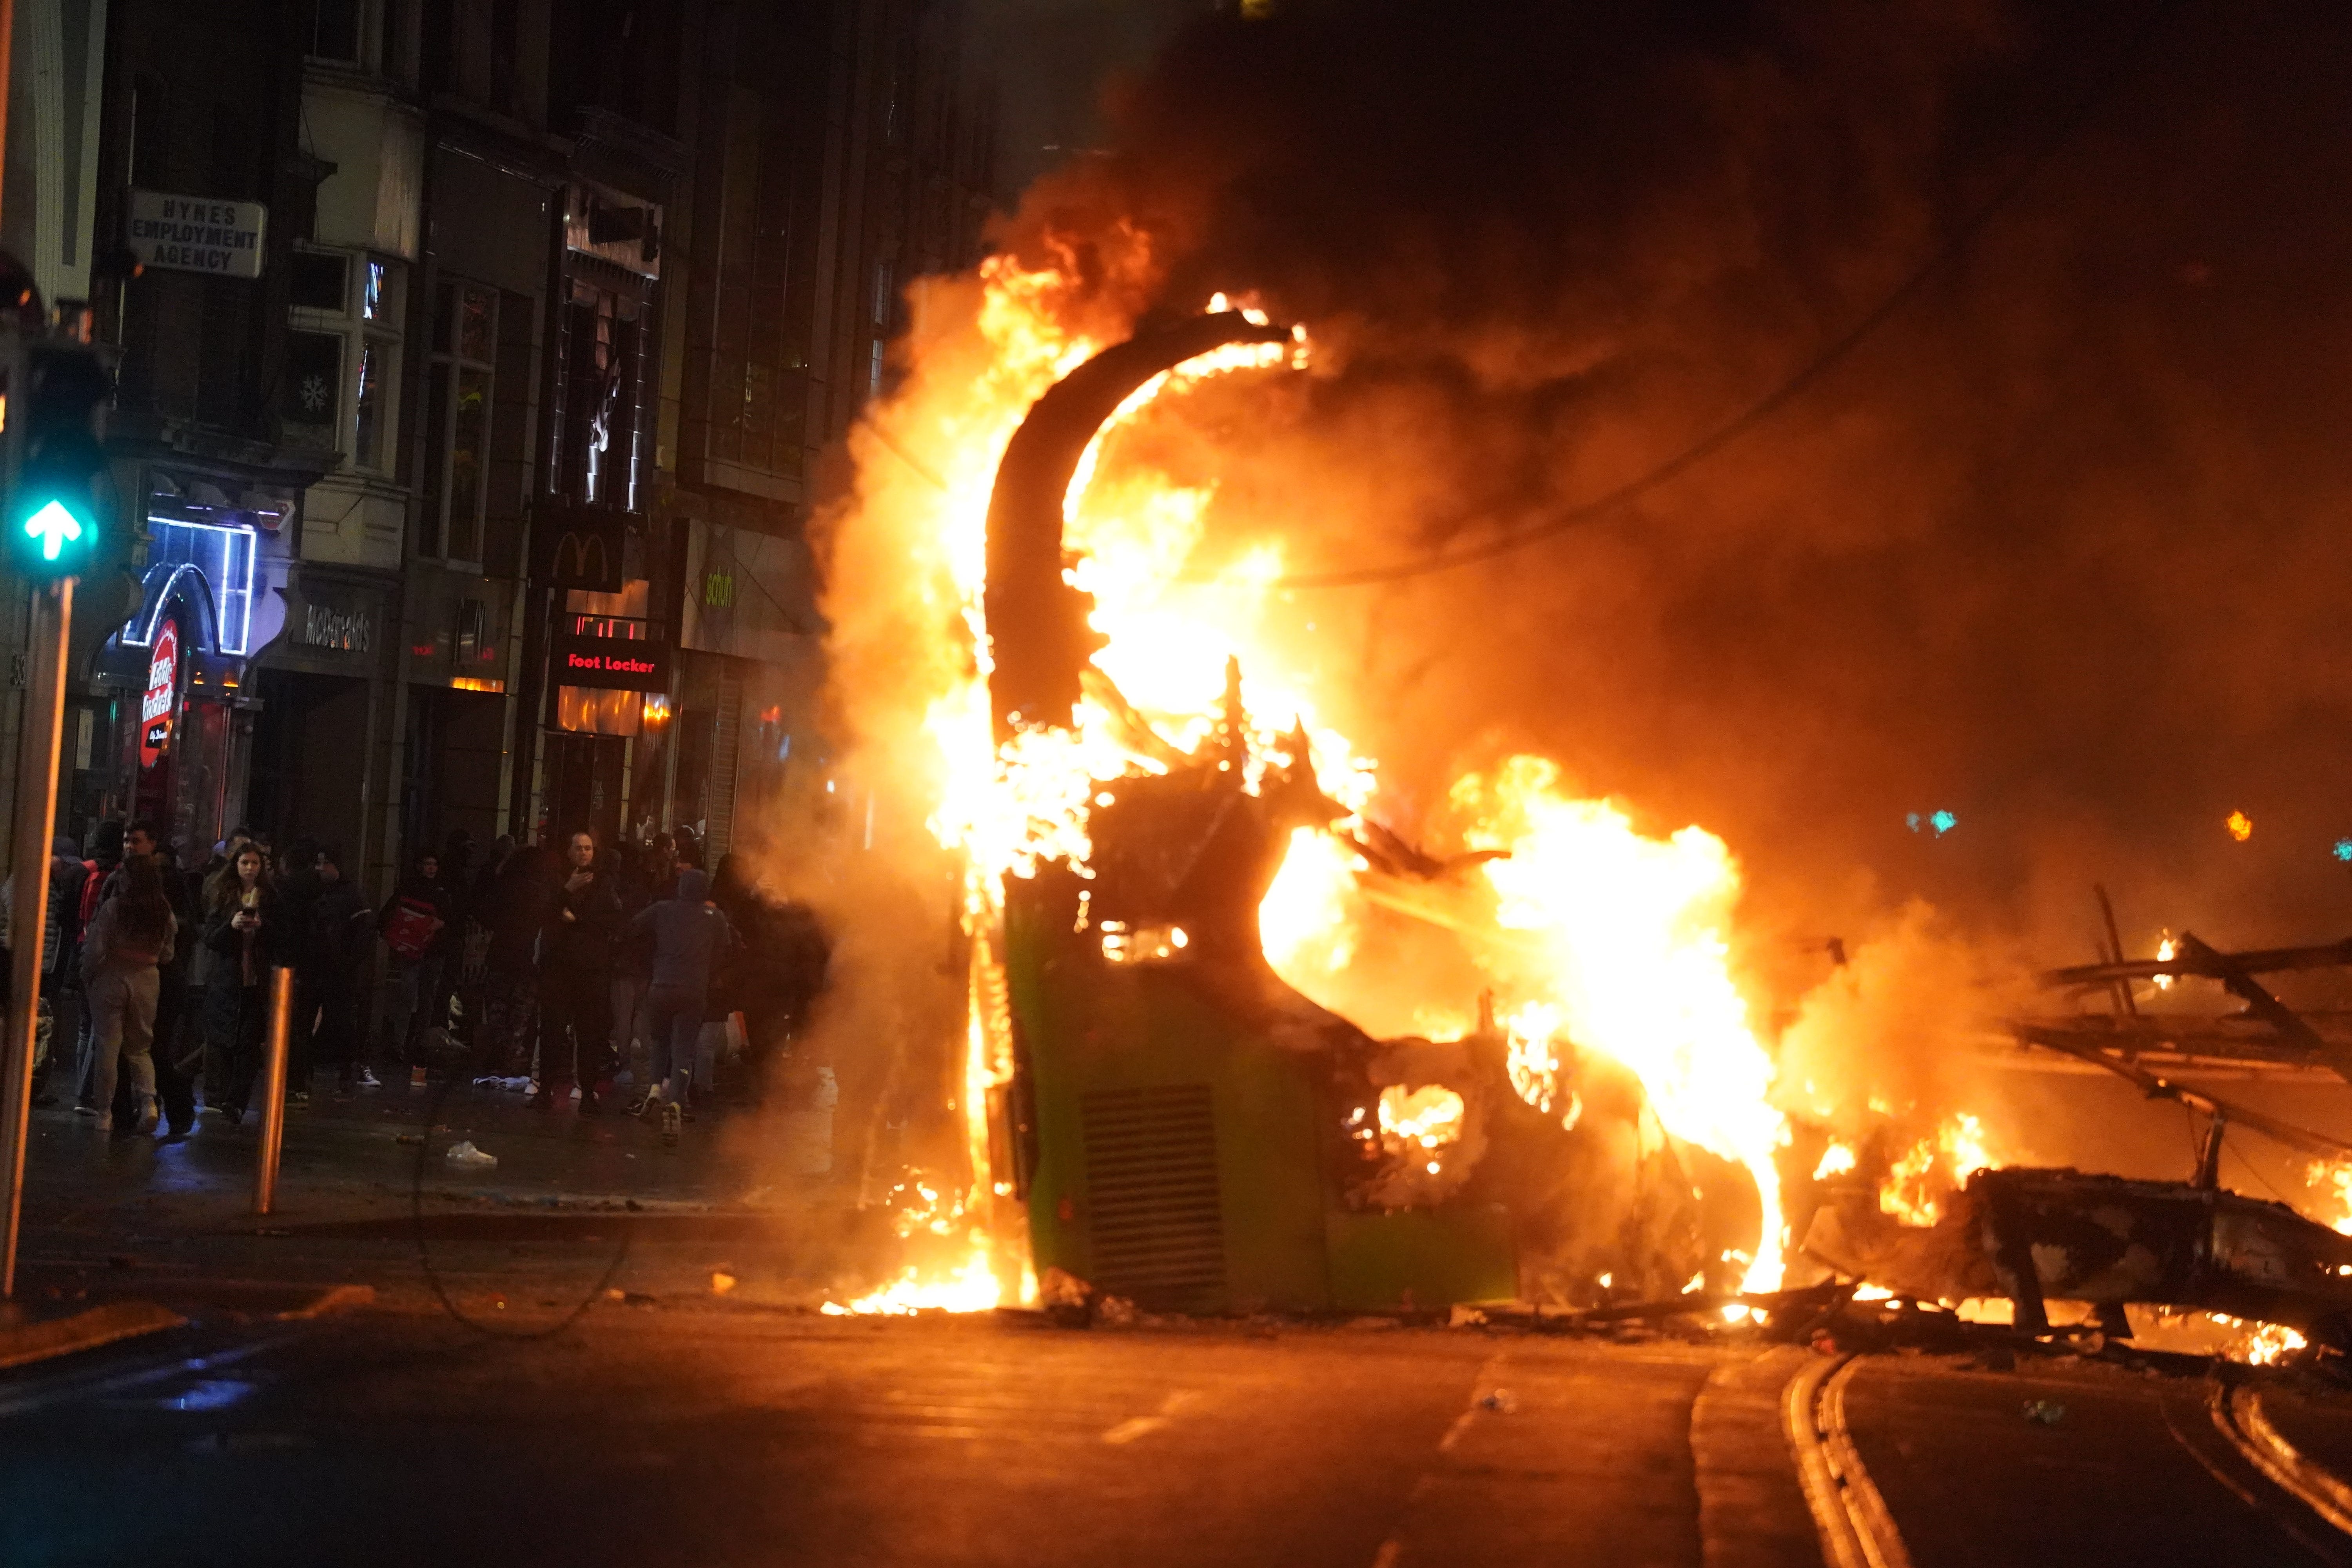 A bus on fire on O’Connell Street in Dublin city centre after violent scenes unfolded following a knife attack on Parnell Square East on Thursday